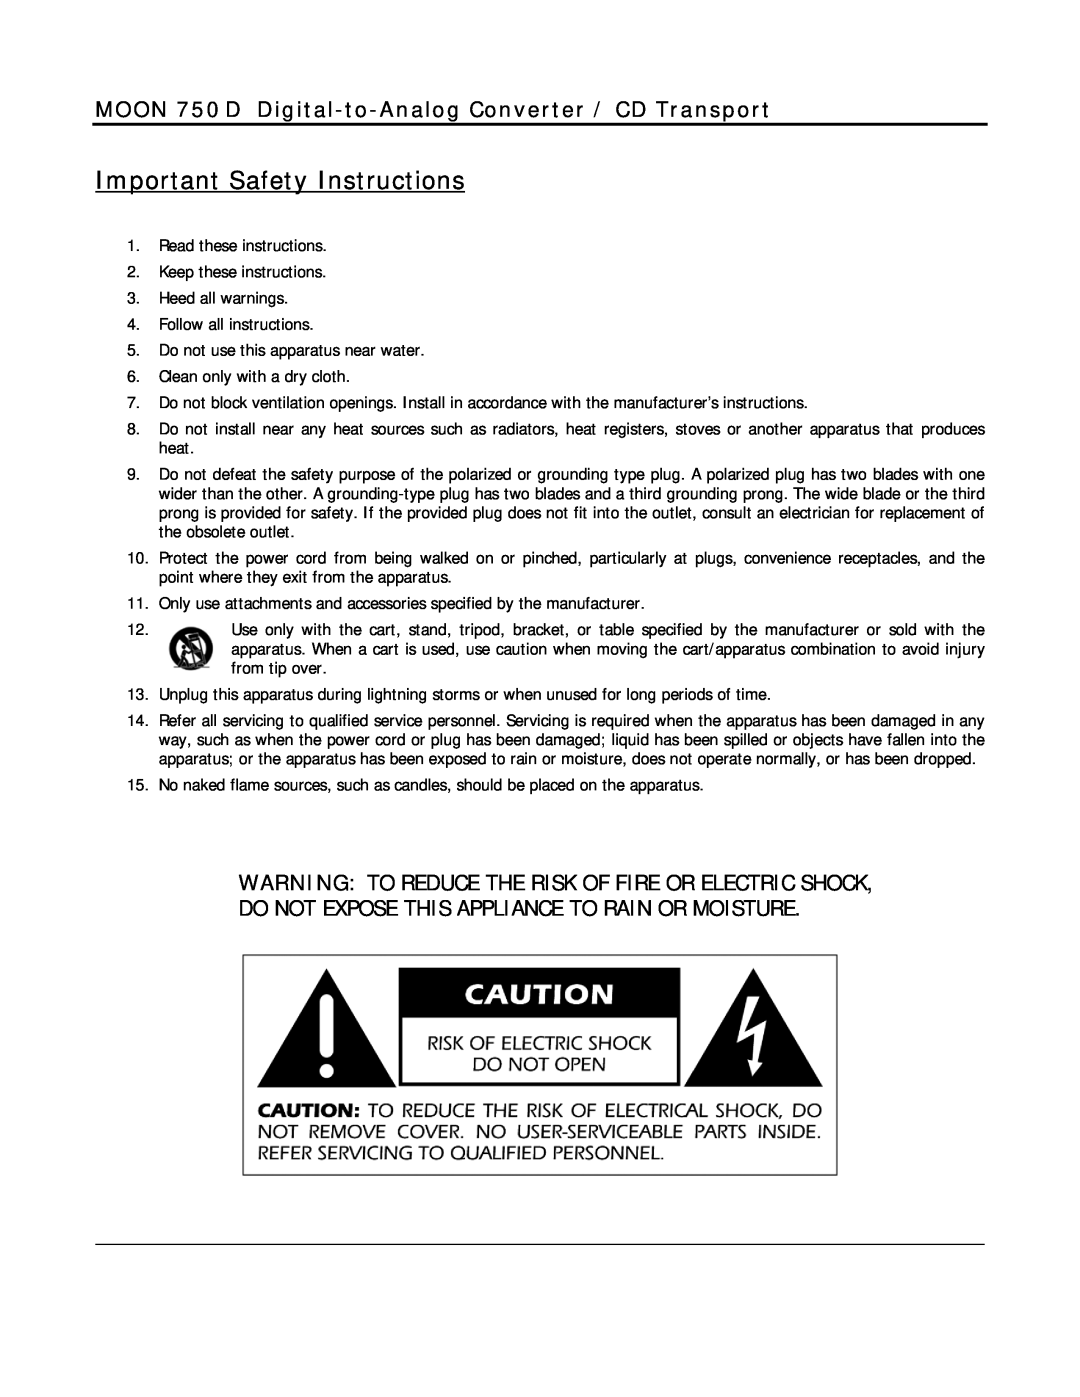 Simaudio owner manual Important Safety Instructions, MOON 750 D Digital-to-Analog Converter / CD Transport 